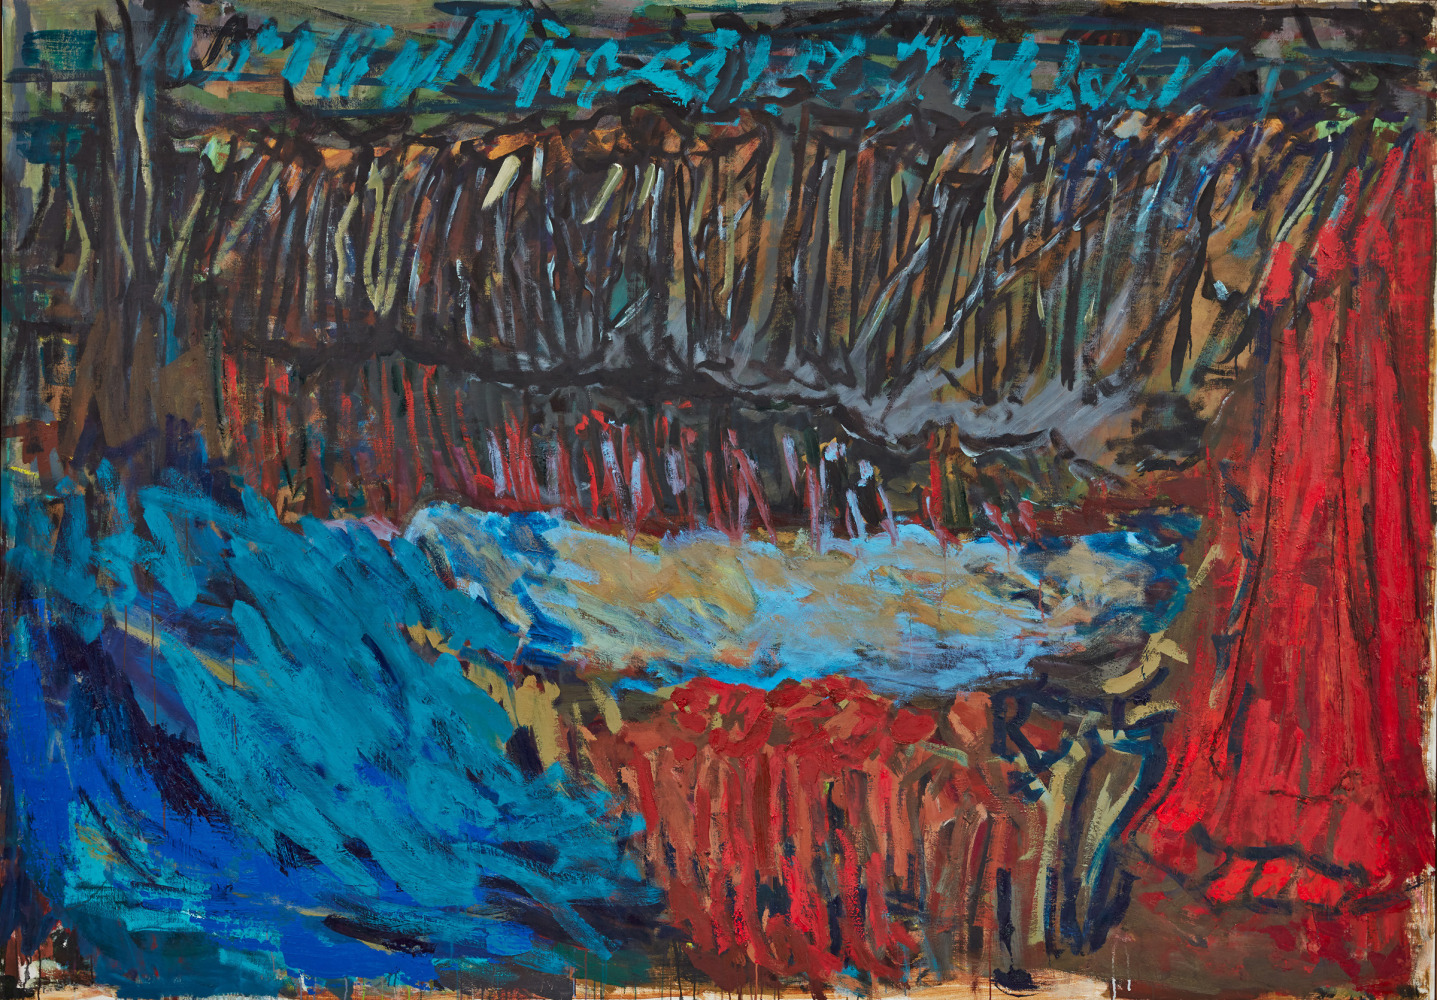 Per Kirkeby

&amp;ldquo;Untitled&amp;rdquo;, 2011

Oil on canvas

69 x 98 1/2 inches

175 x 250 cm

PK 1353